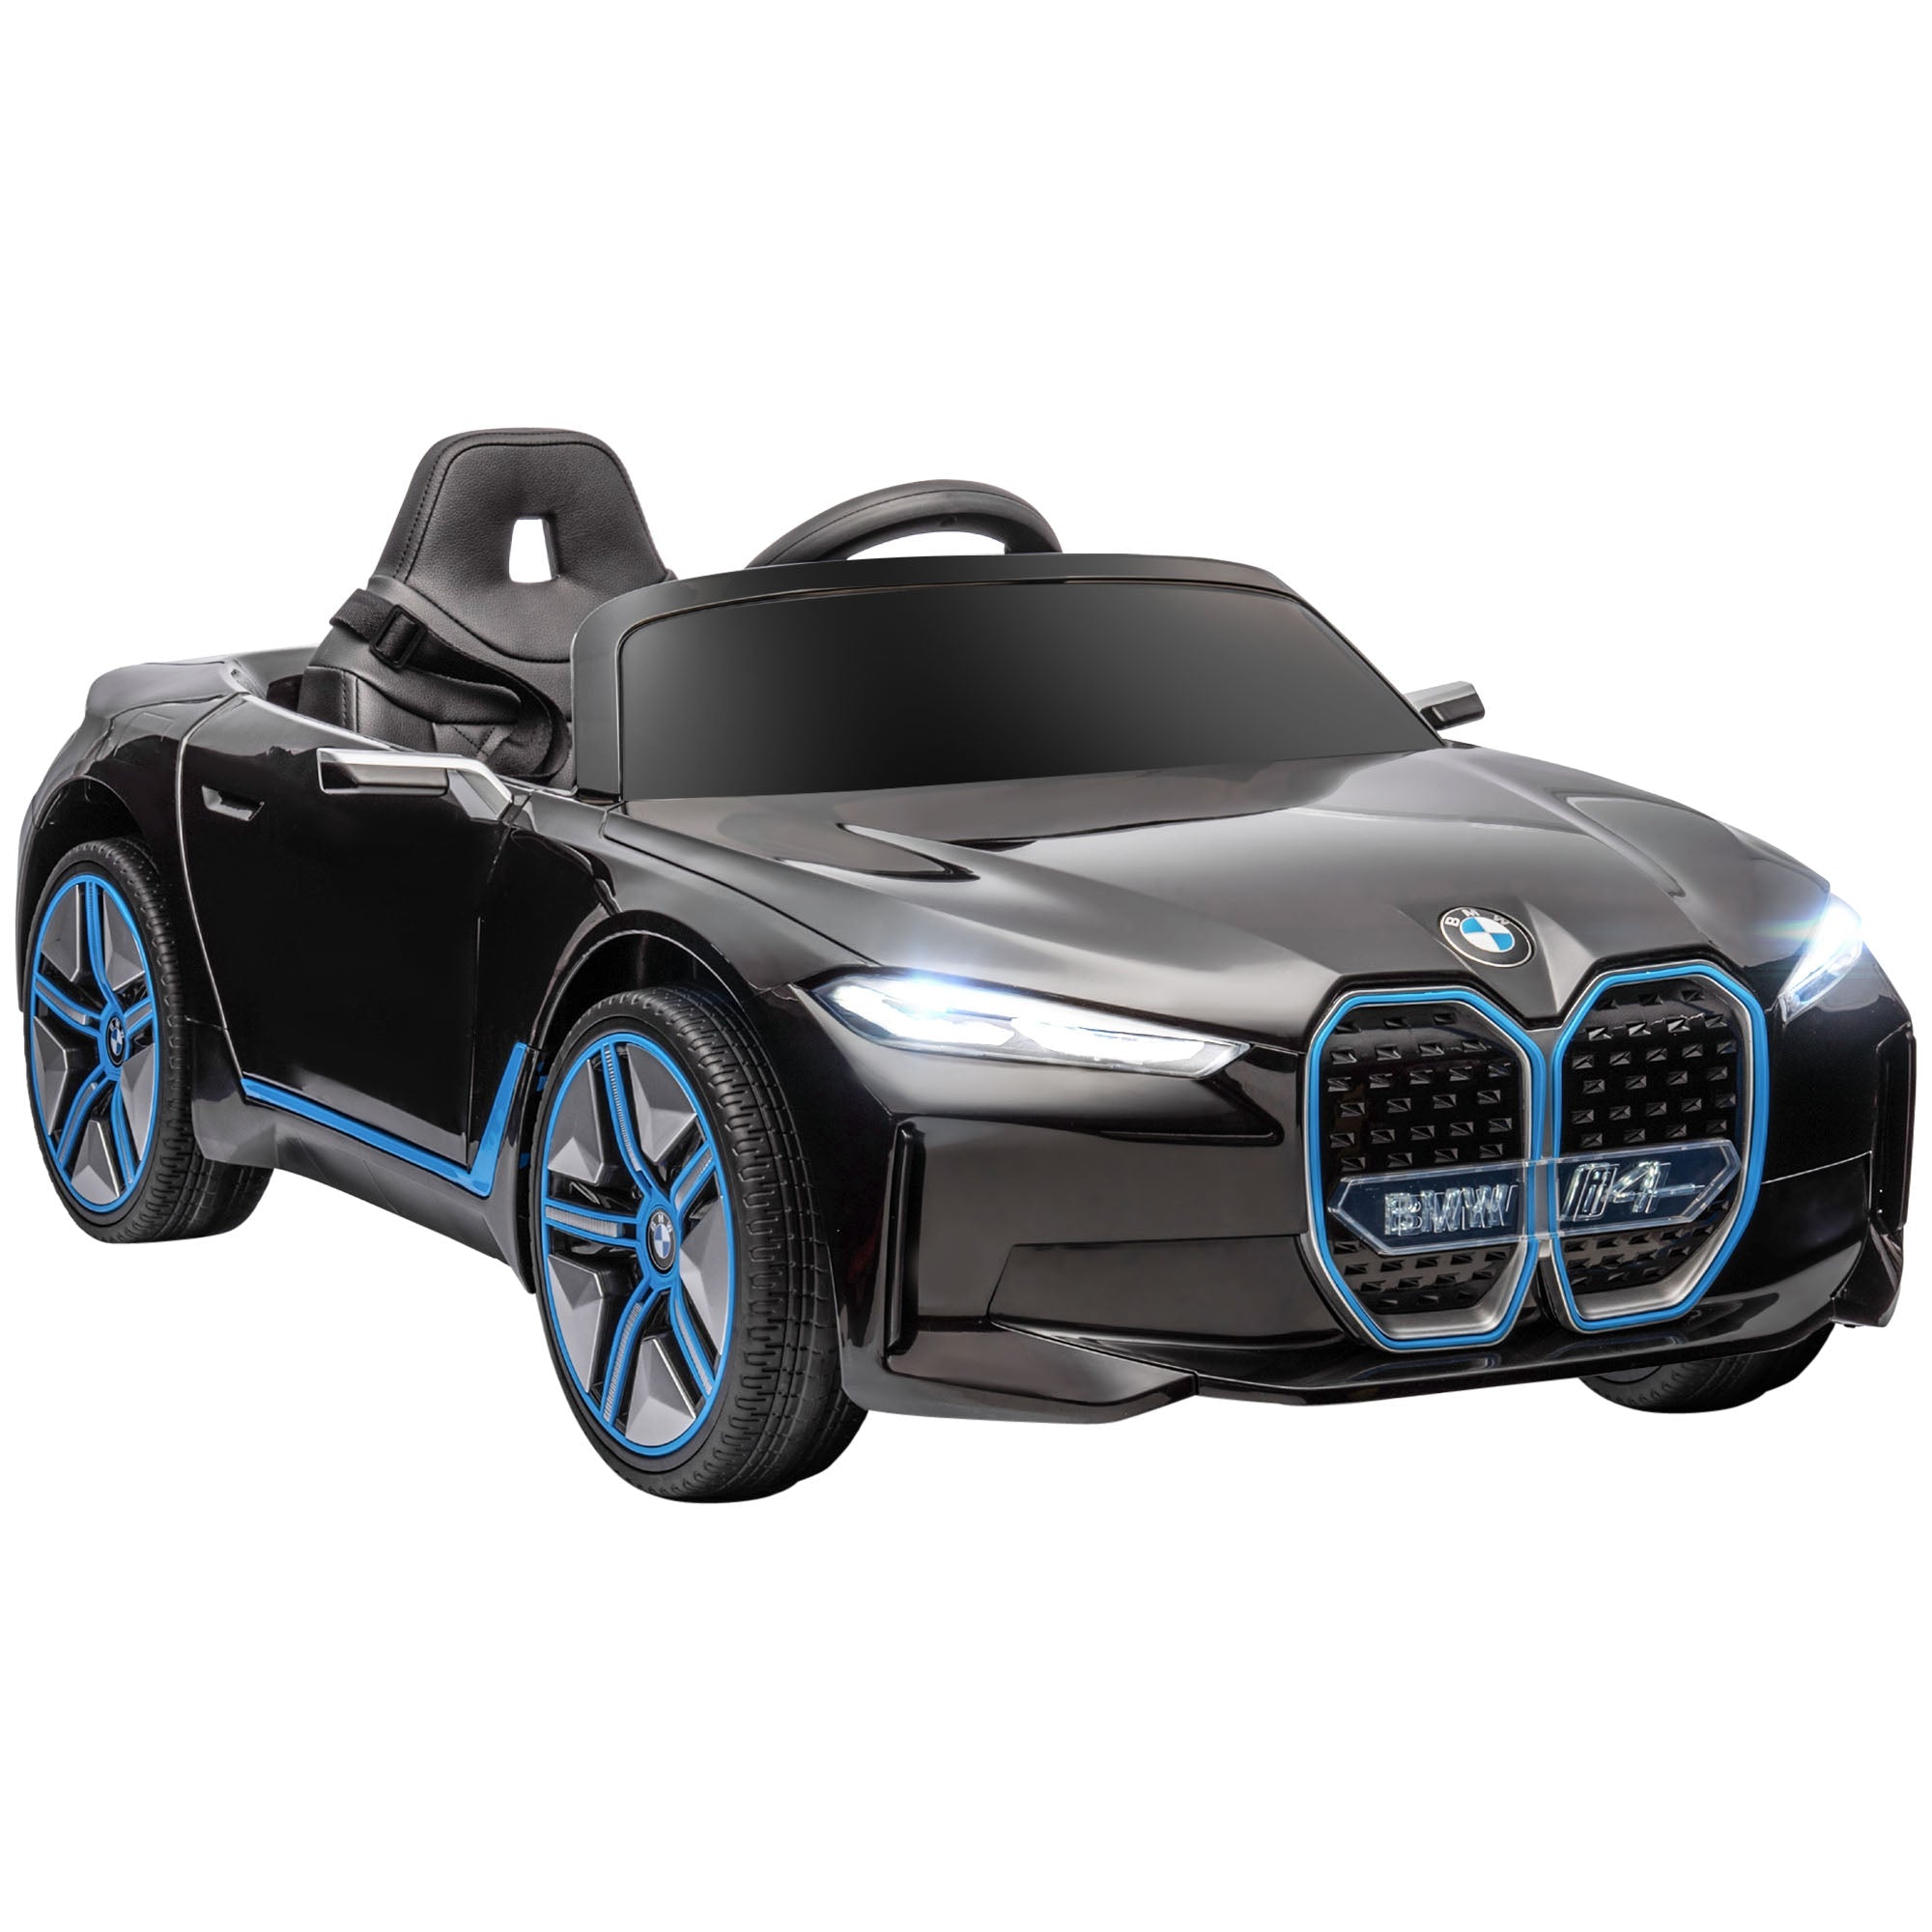 HOMCOM BMW i4 Licensed 12V Kids Electric Ride On Car with Remote Control, Portable Battery, Music, Horn & Headlights (Black)